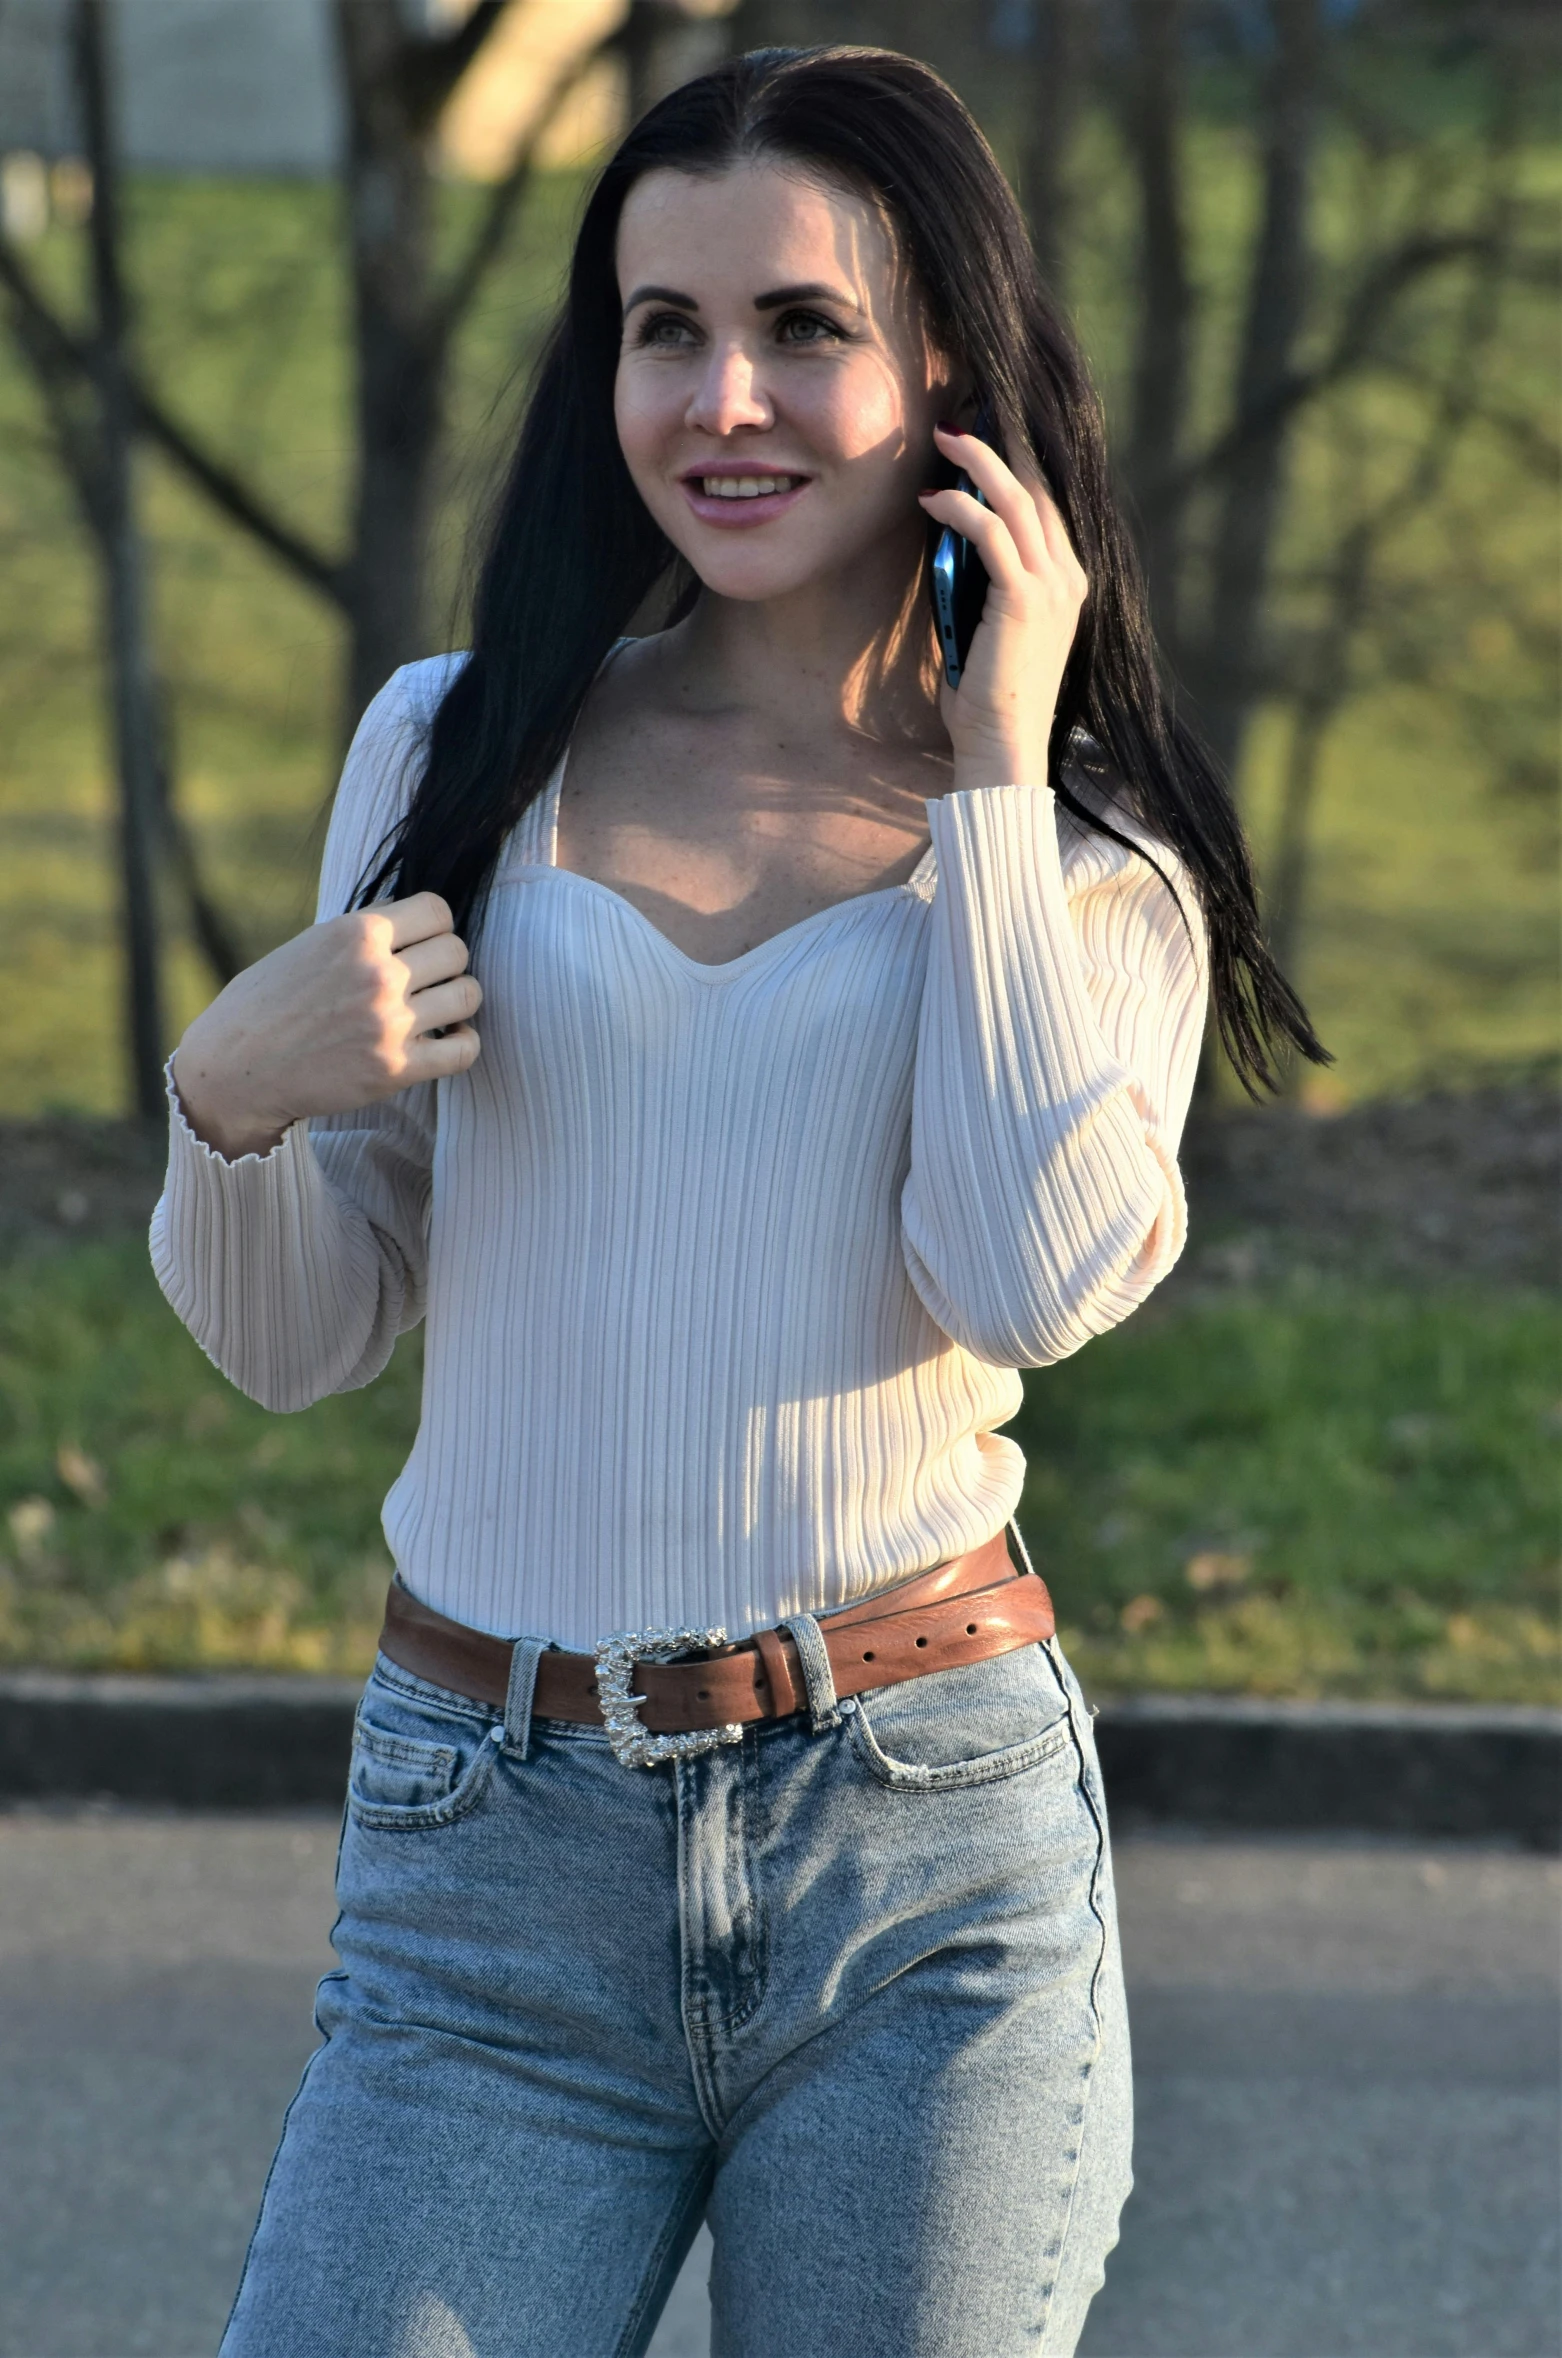 a woman in jeans talking on a cell phone, instagram, renaissance, open neck collar, light tan, sha xi, half body cropping